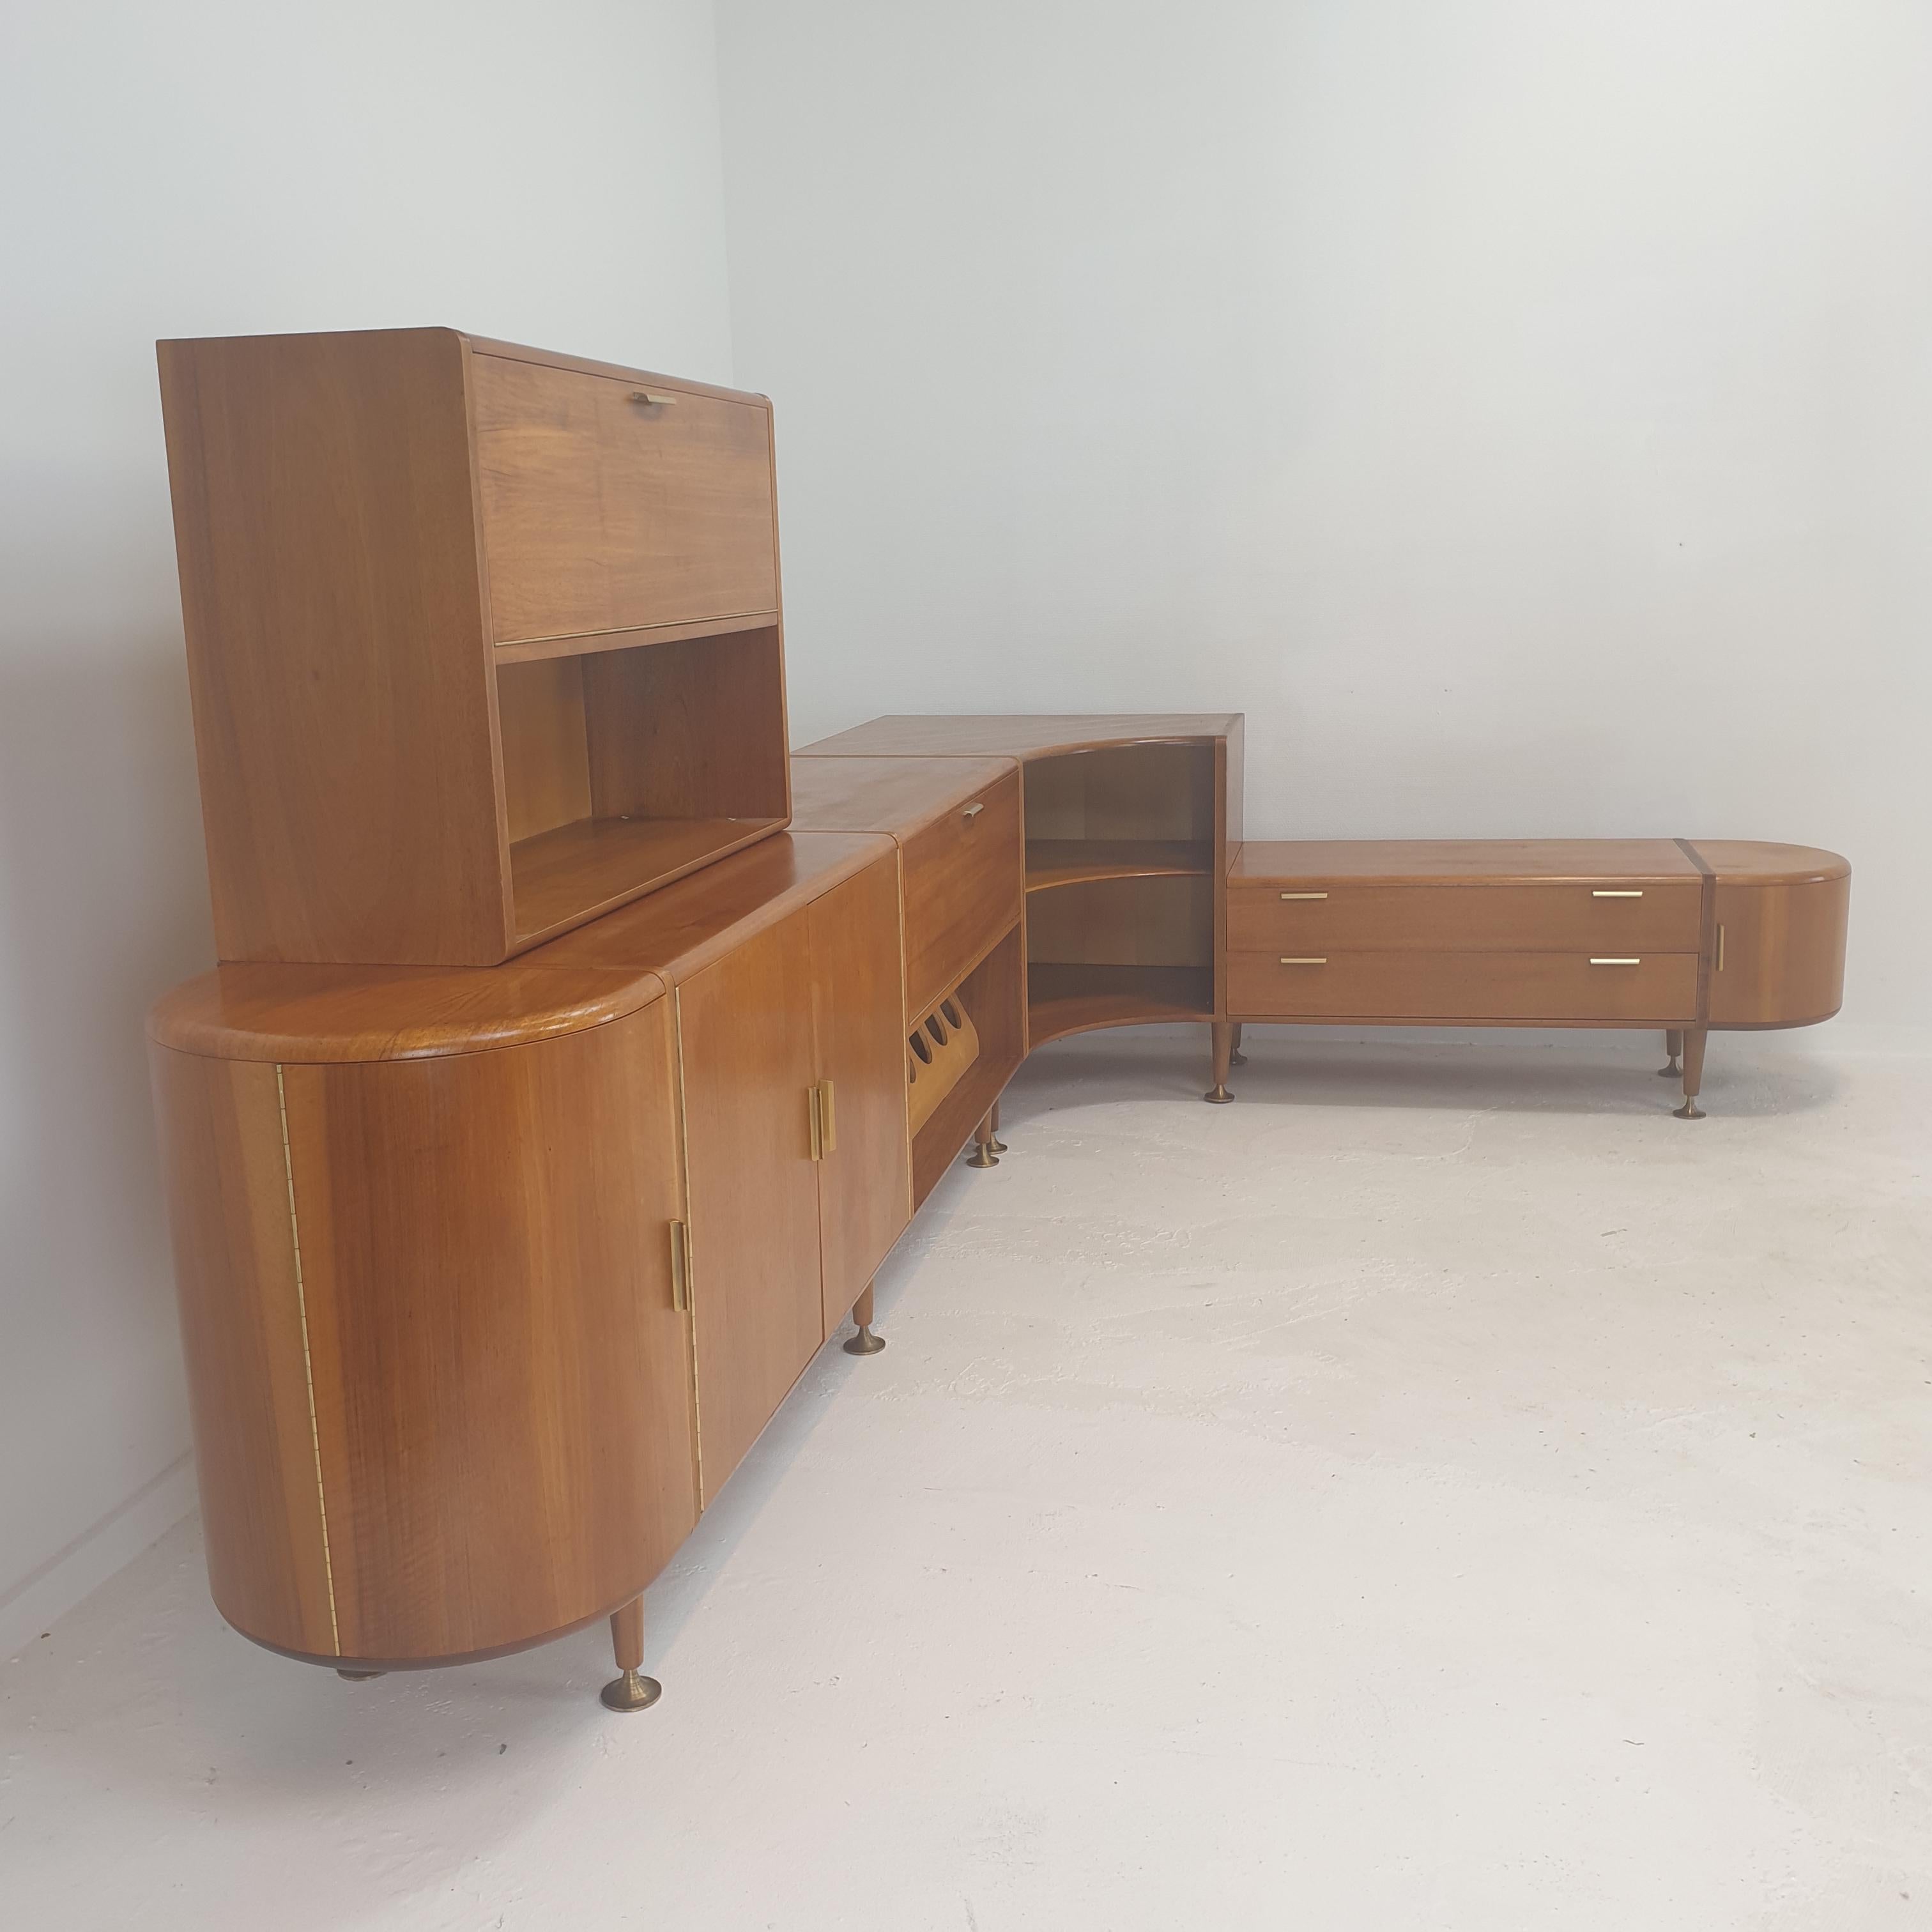 Dutch Mid-Century Walnut Cabinet and Sideboard by A.A. Patijn for Zijlstra, 1950's For Sale